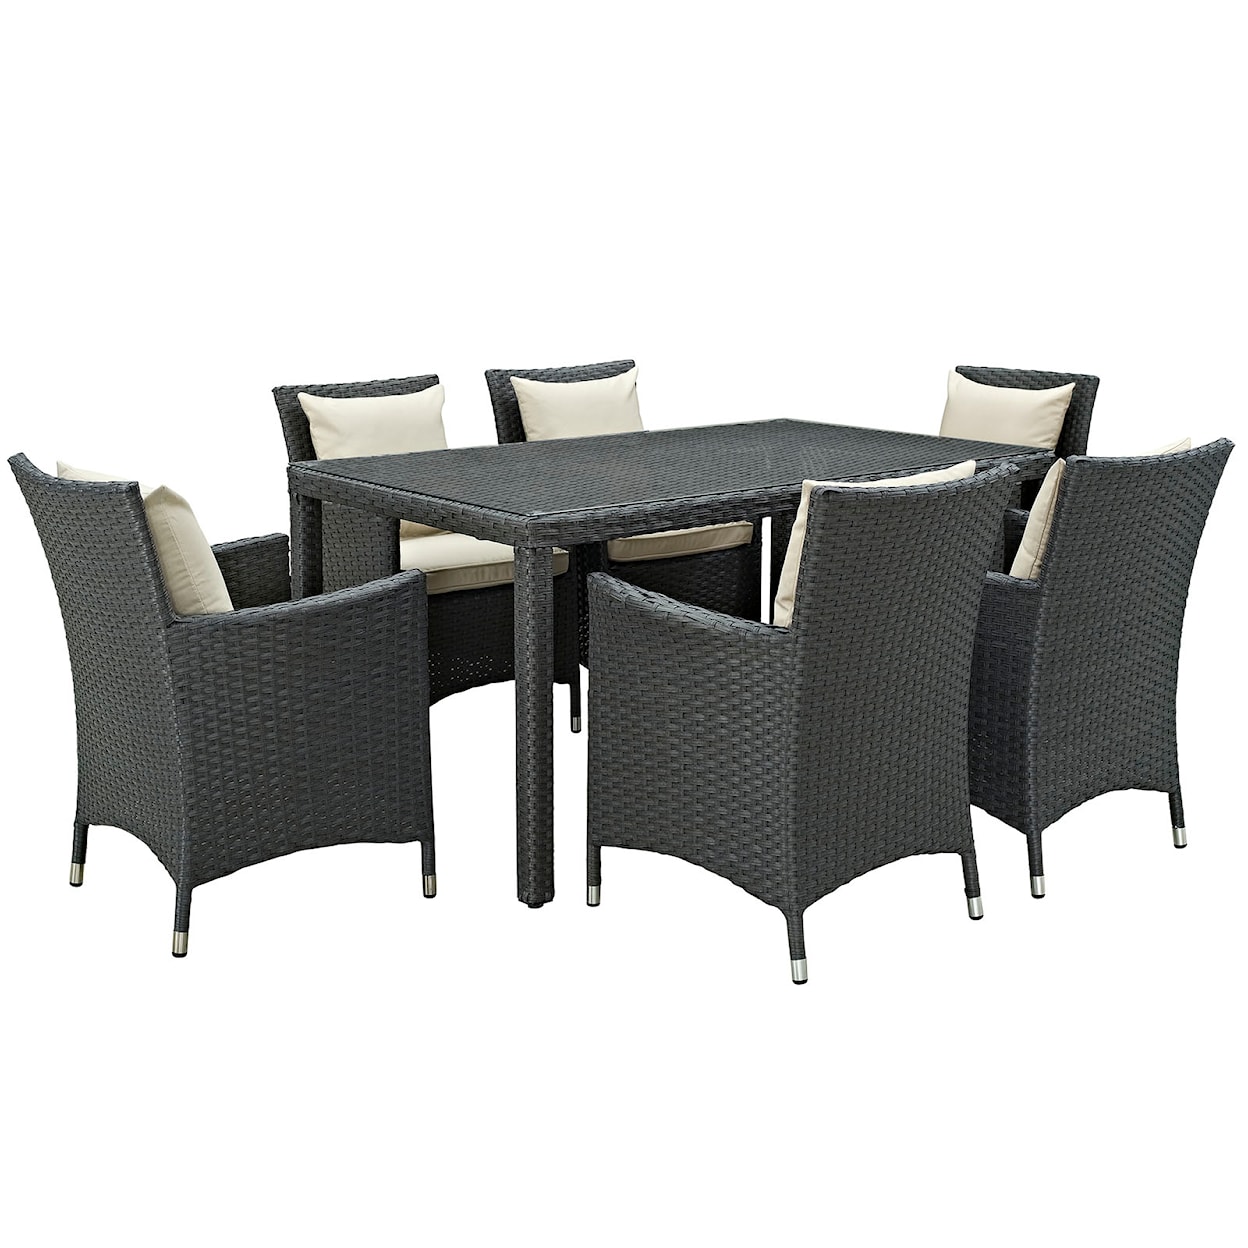 Modway Sojourn Outdoor 7 Piece Dining Set